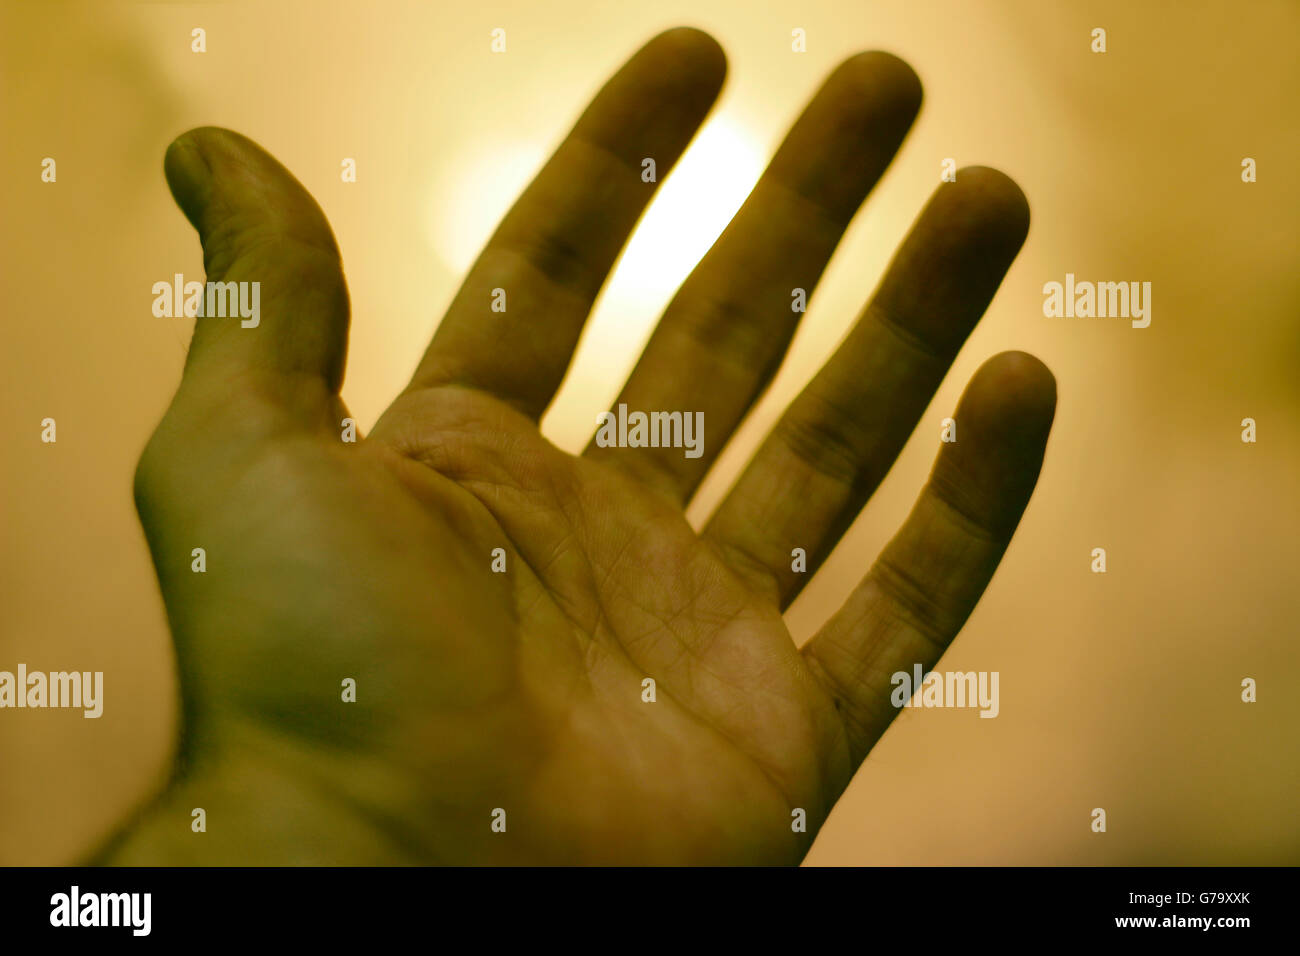 Photograph of a human hand on a blurred light background Stock Photo